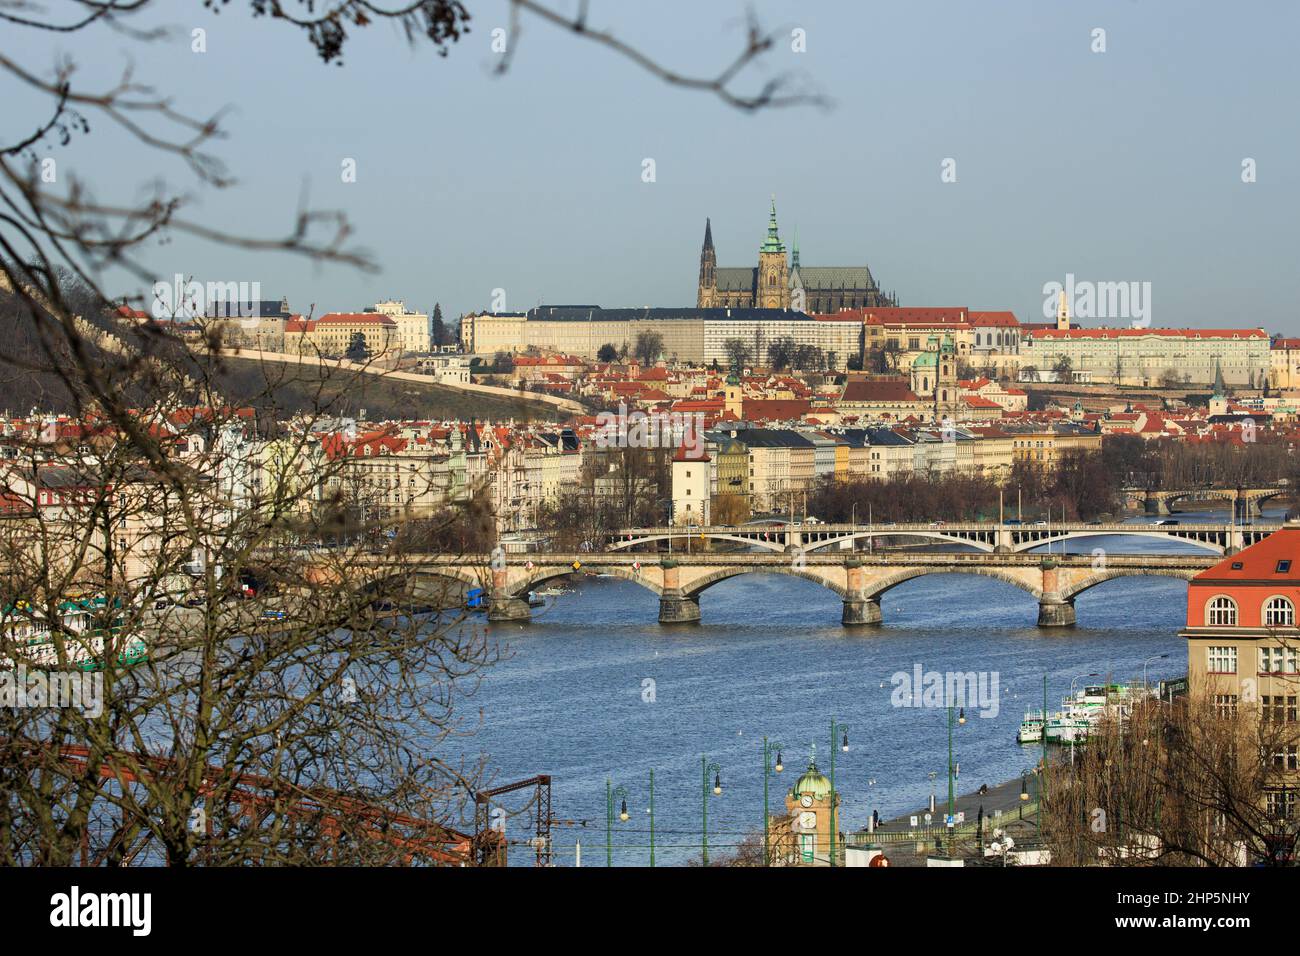 View of St Vitus Cathedral, Mala Strana, Prague Castle, the Charles Bridge over the River Vltava, from Vysehrad Fortress, Prague, Czech Republic Stock Photo